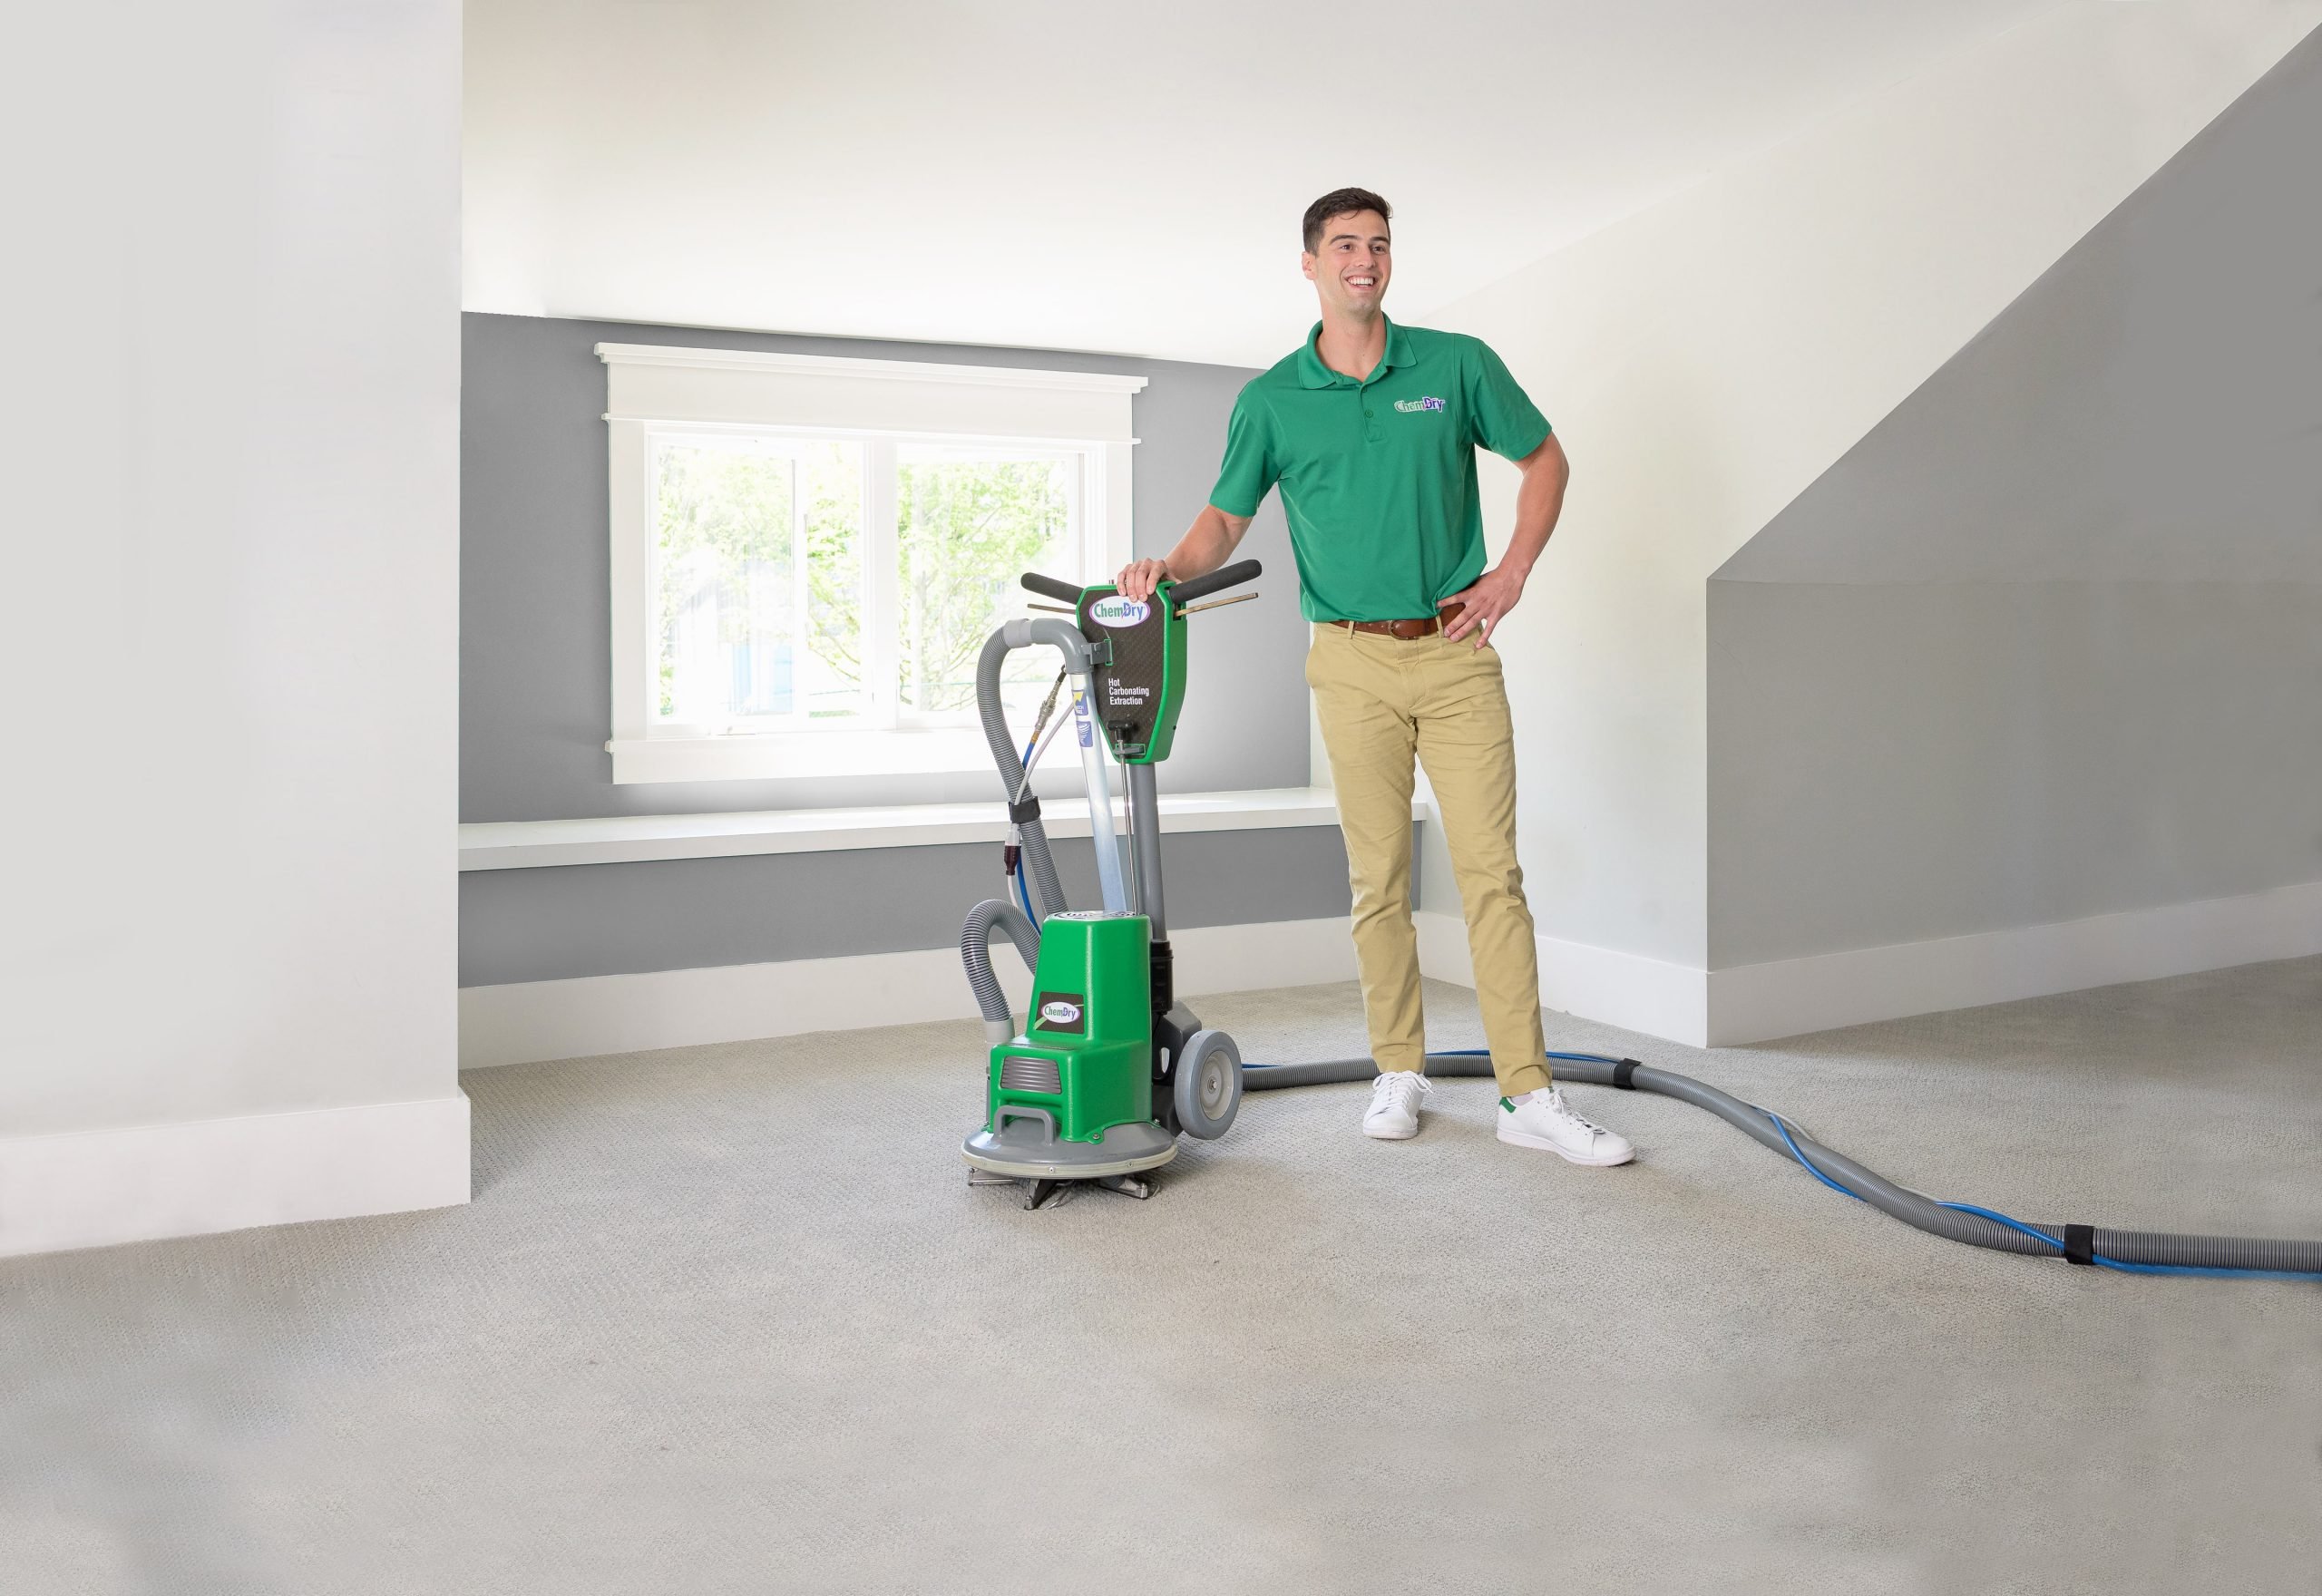 carpet cleaning technician using a powerhead cleaning equipment